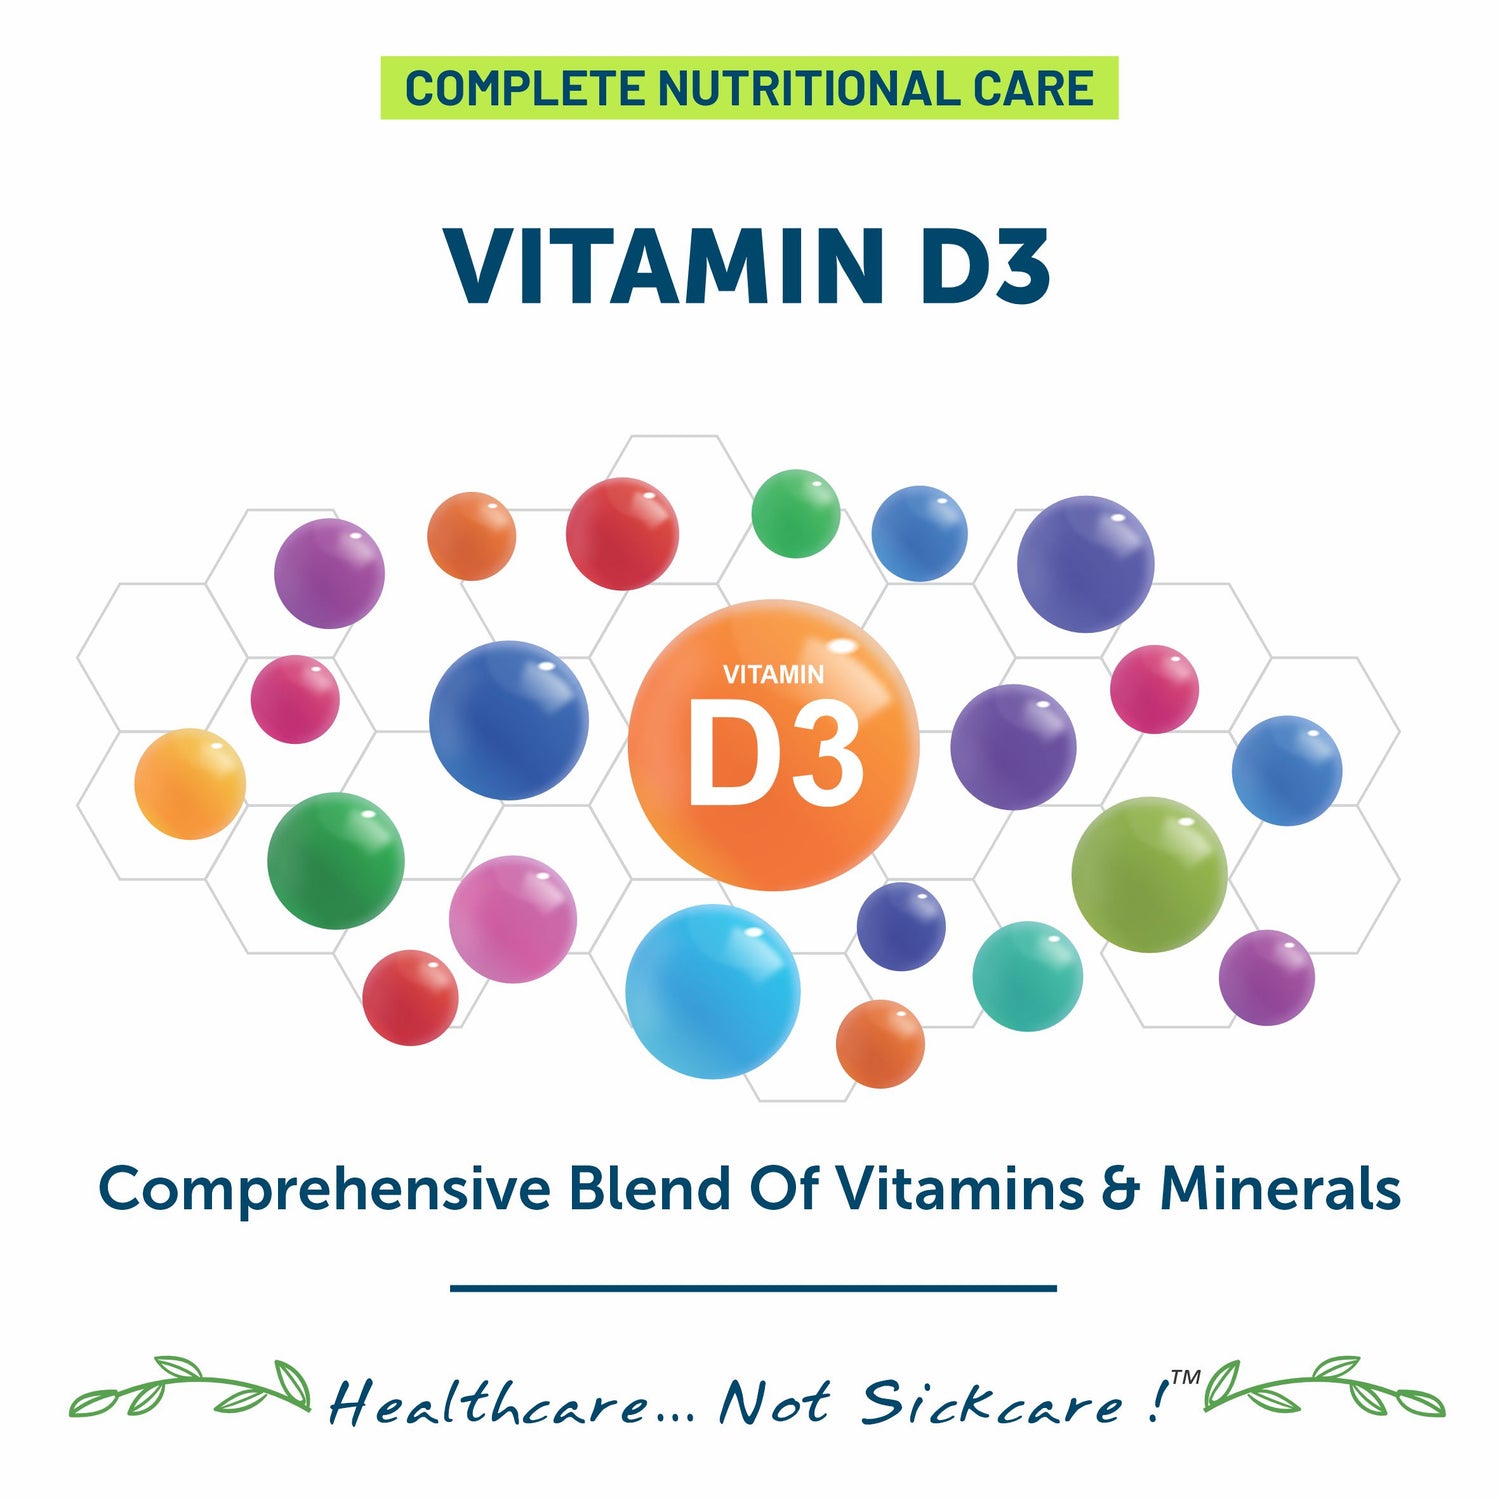 The premium formula contains high quality forms of Vitamin D3 ensuring daily intake requirements of calcium thus improving bone health.